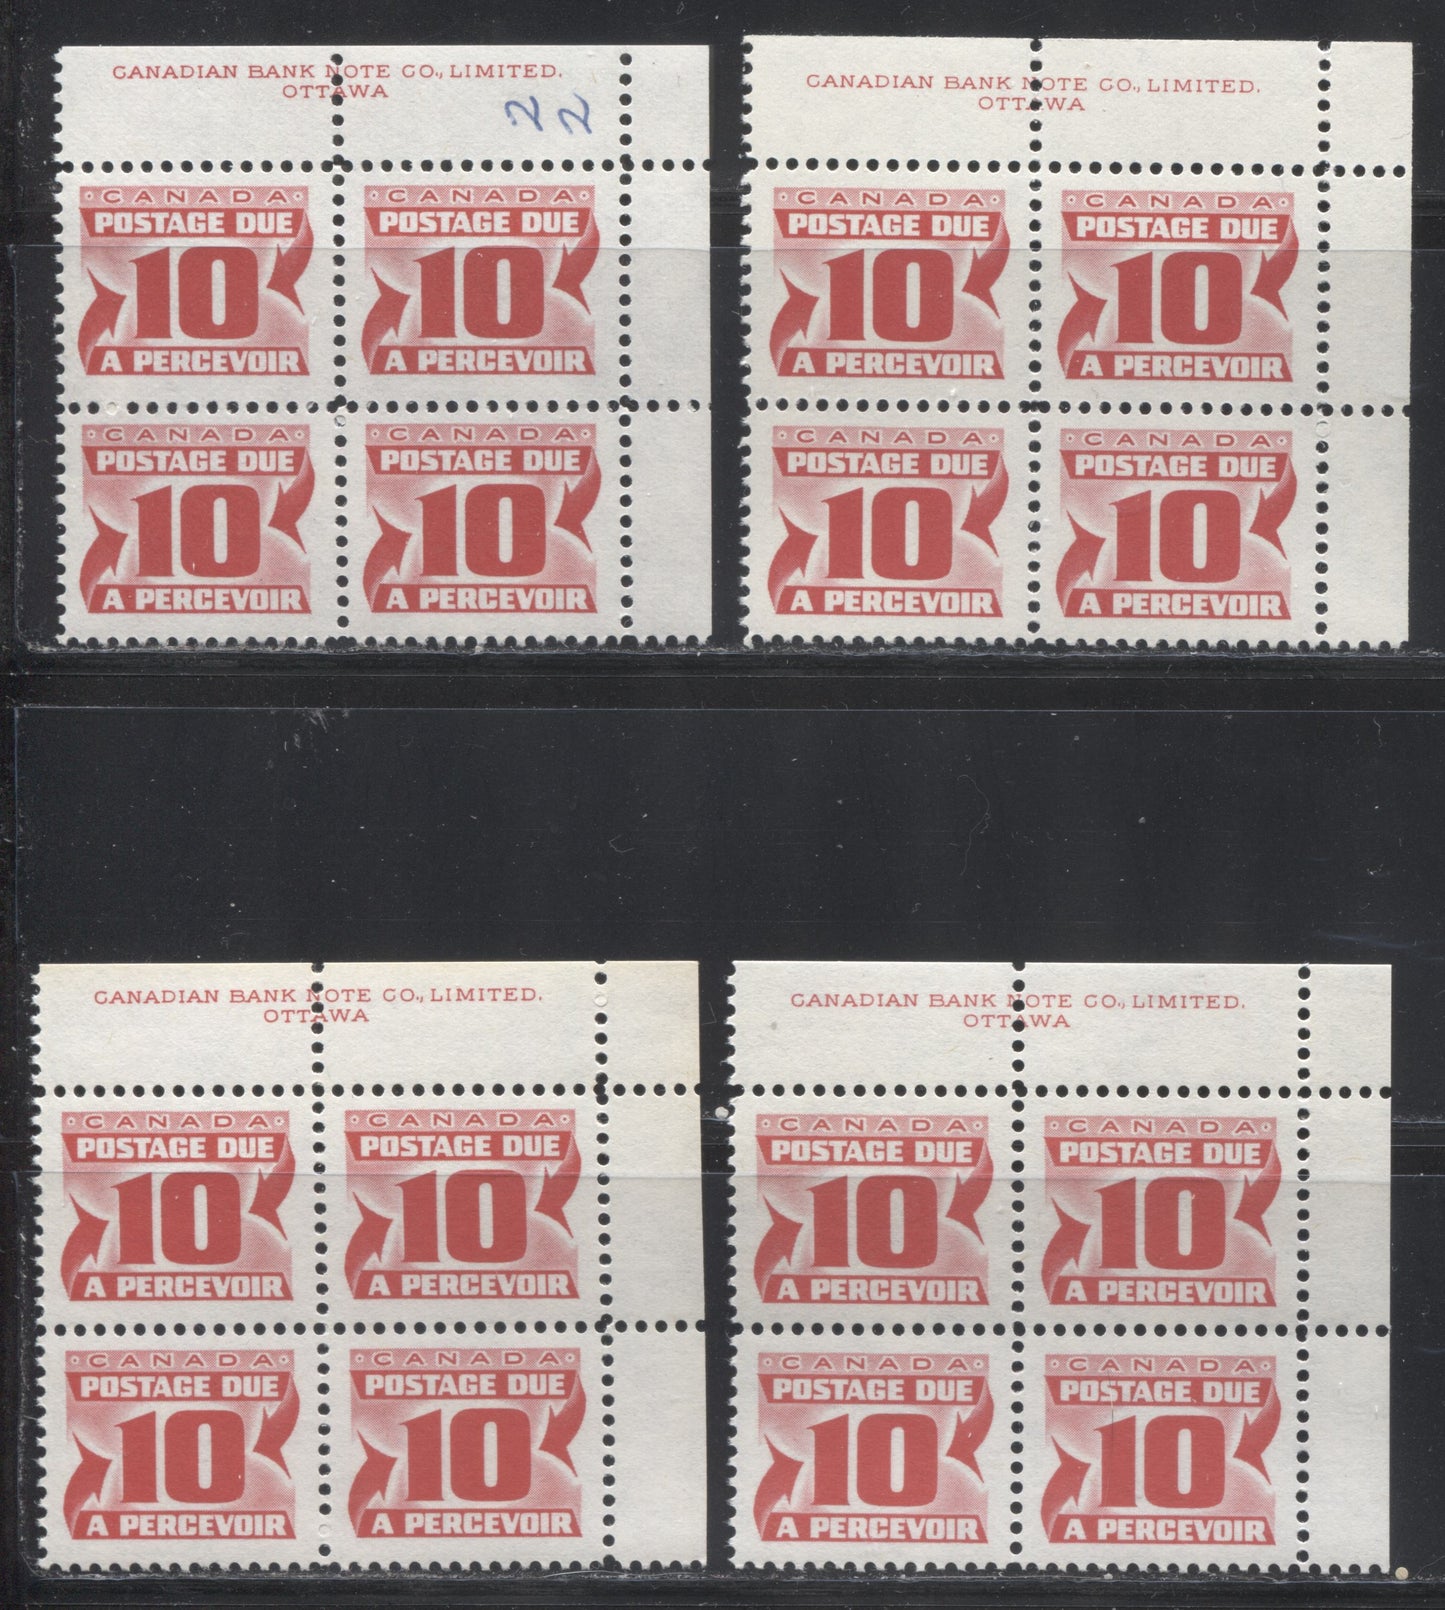 Lot 119 Canada #J35i 10c Carmine Rose 1973-1977, 3rd Centennial Postage Due Issue, Four F/VFNH UR Inscription Blocks Of 4 On DF, LF & MF Bluish White, Ivory & Bluish Smooth Papers With PVA Gum, Perf 12, Including Unlisted Horizontal Ribbed Paper